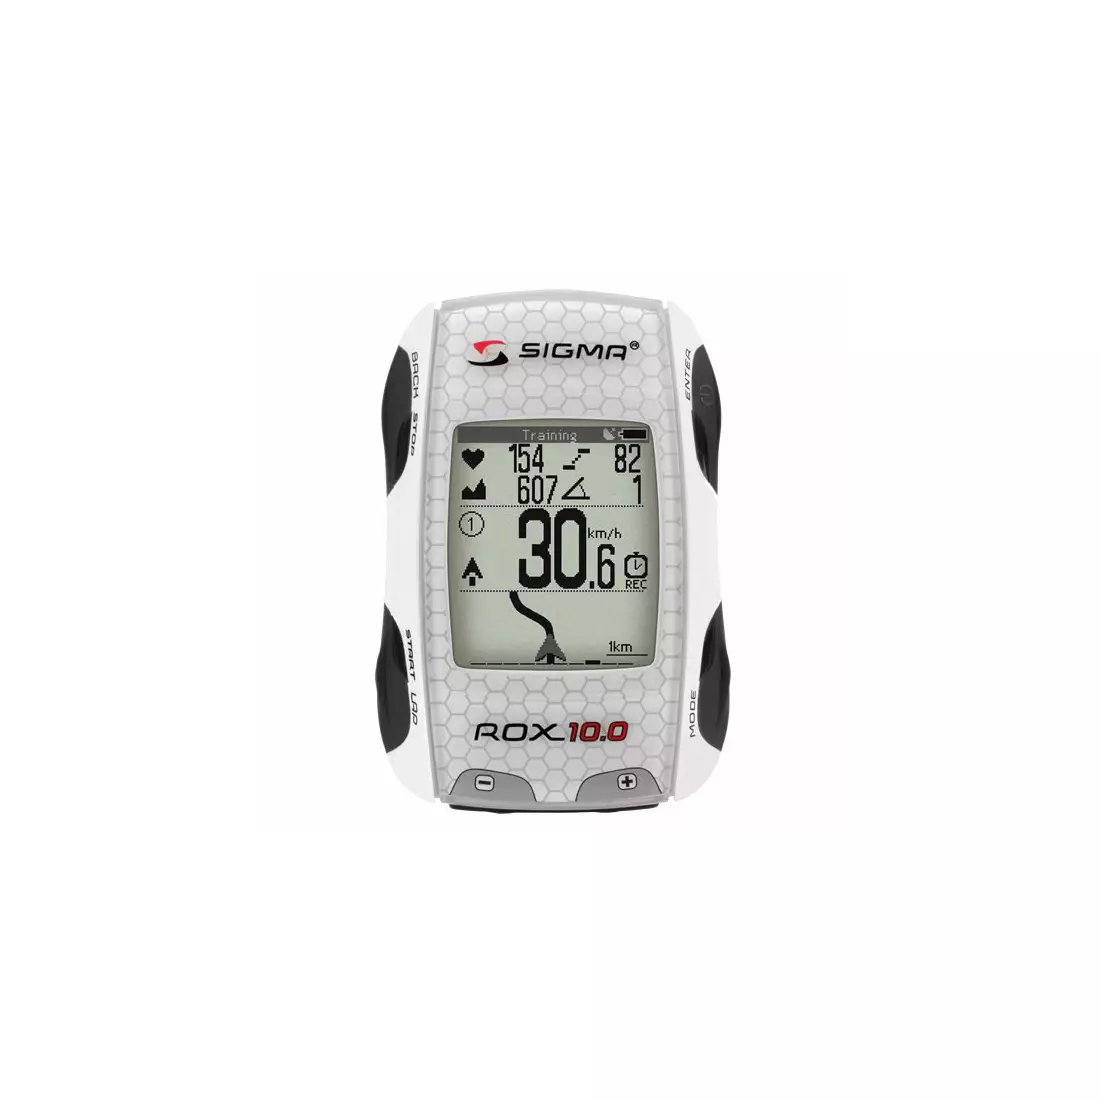 SIGMA SPORT ROX 10.0 GPS BASIC - bicycle computer. White color